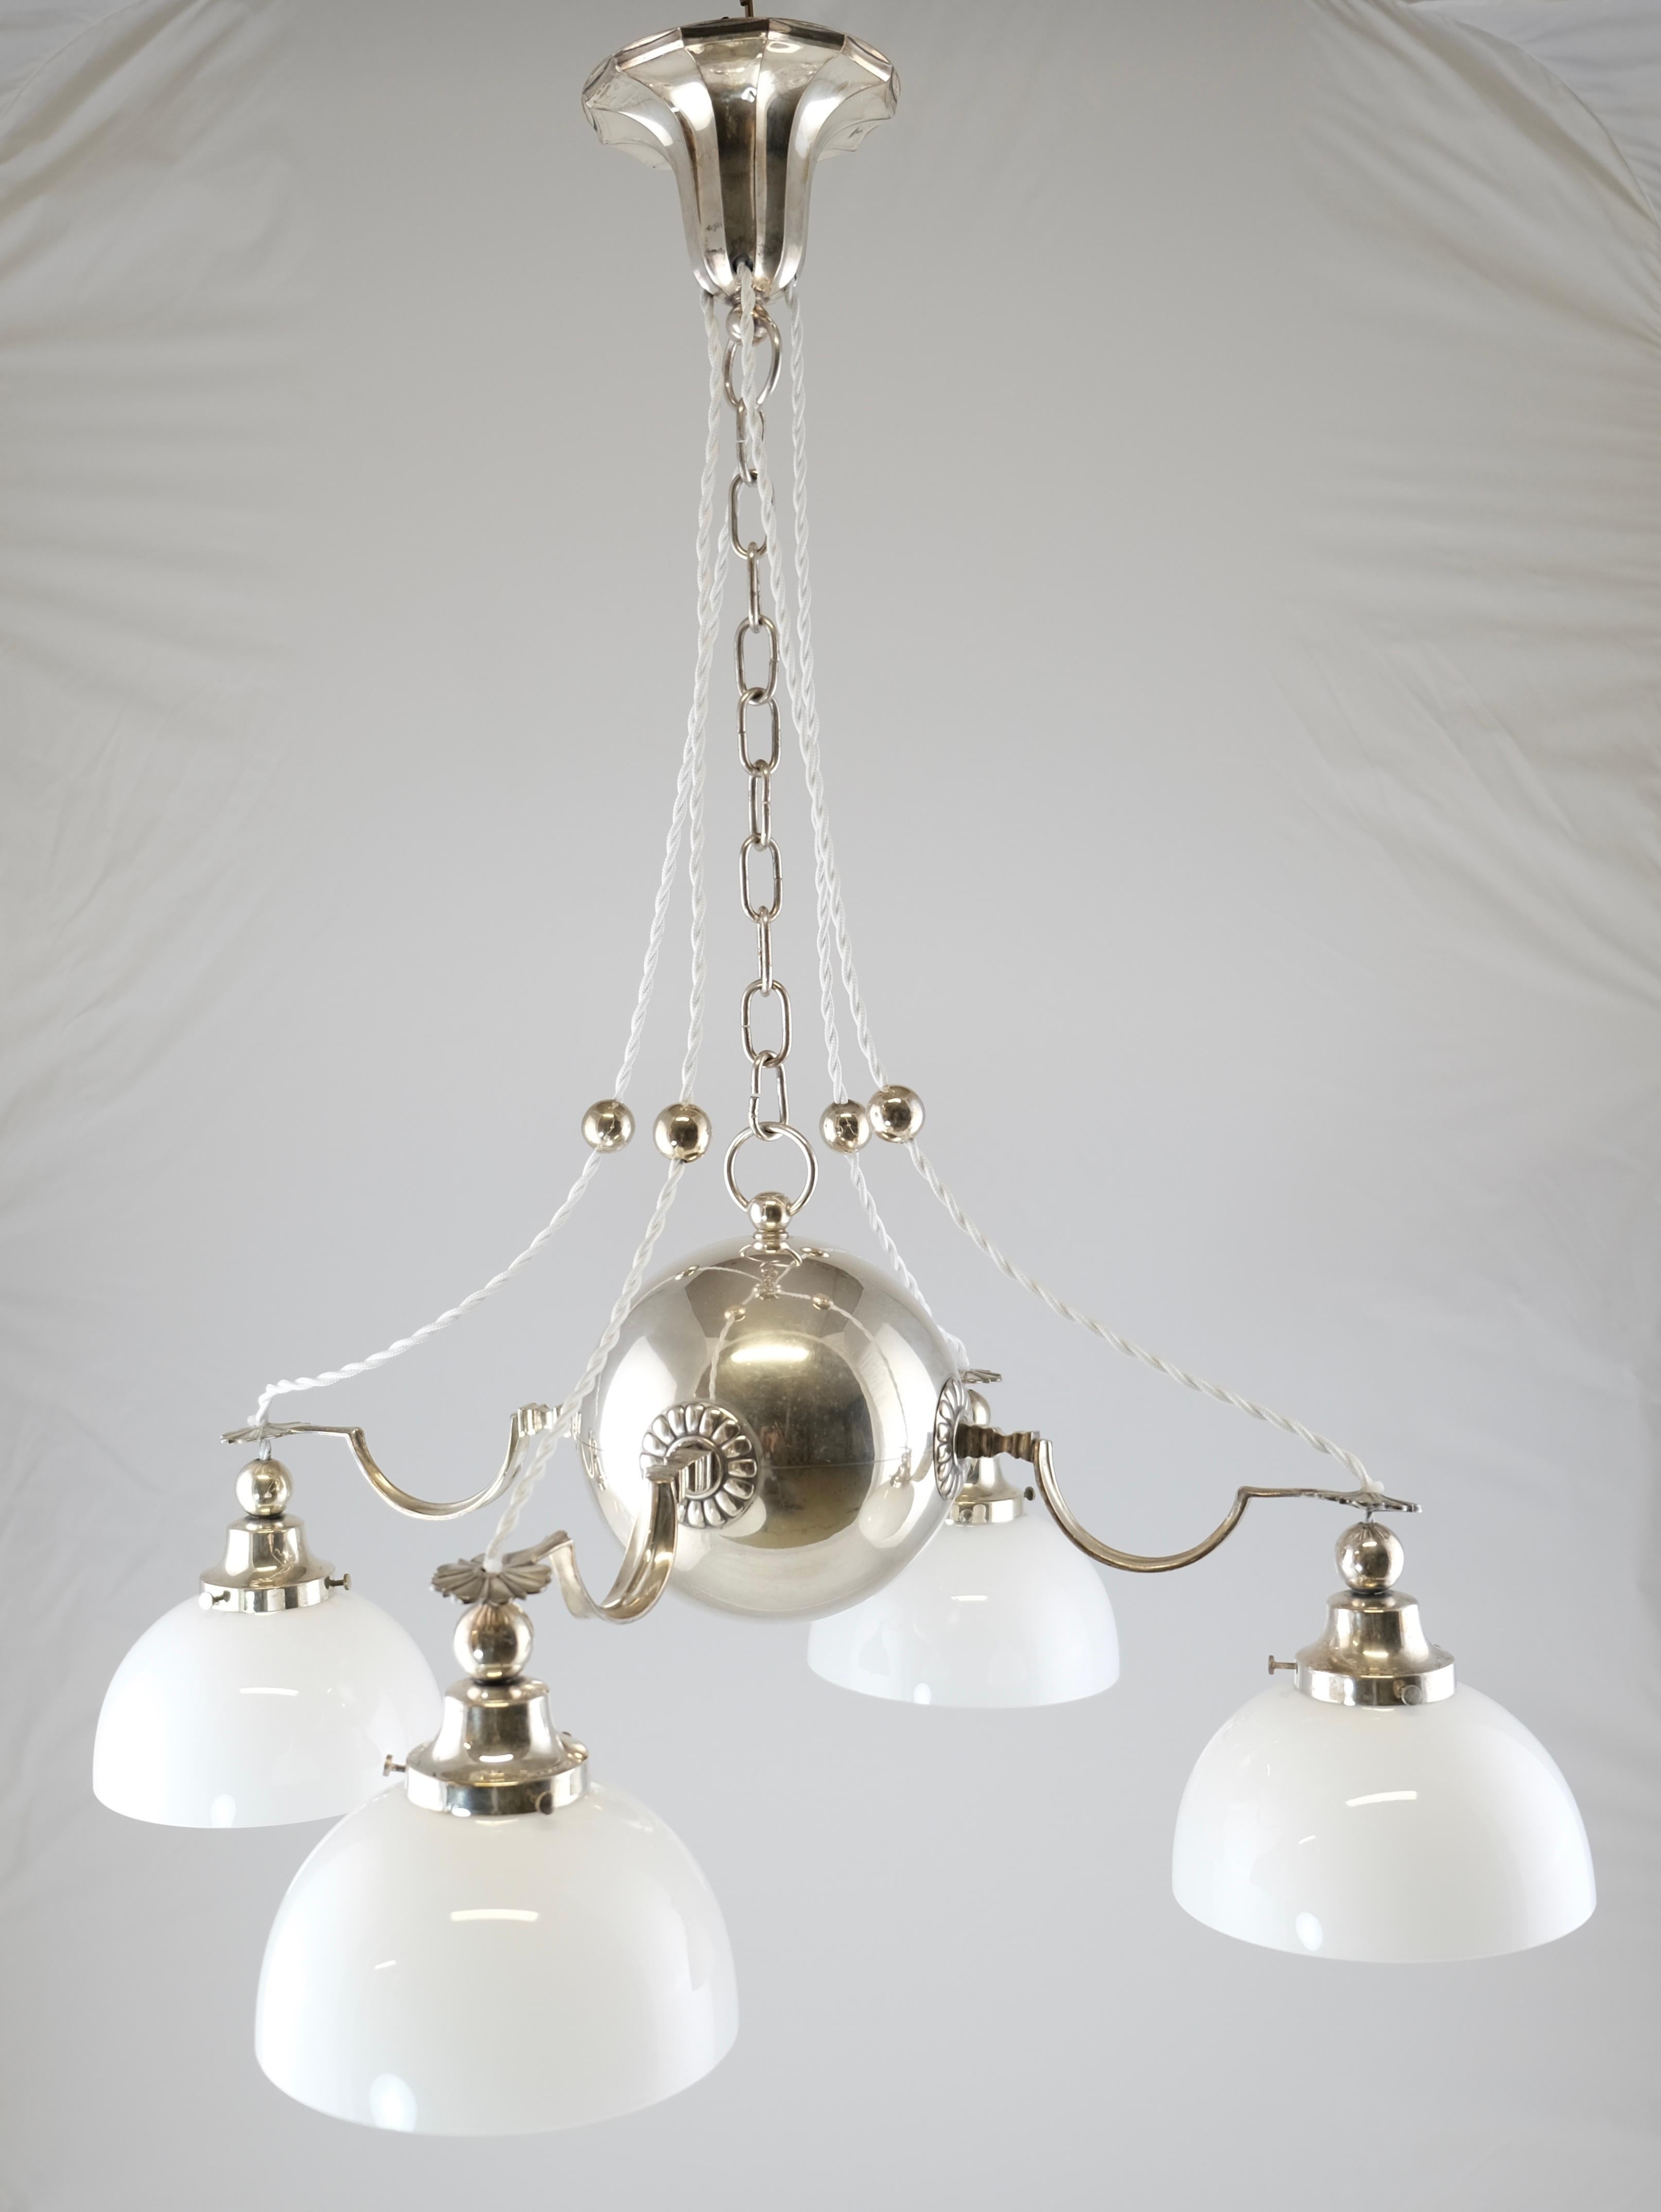 A silvered 4-light lamp made by C.G. Hallberg, Stockholm Sweden. Probably after a design by Elis Bergh. Signed. C G Hallberg under a crown.
Identical to the other one we have which can make it a pair if you need to. They came from the same estate